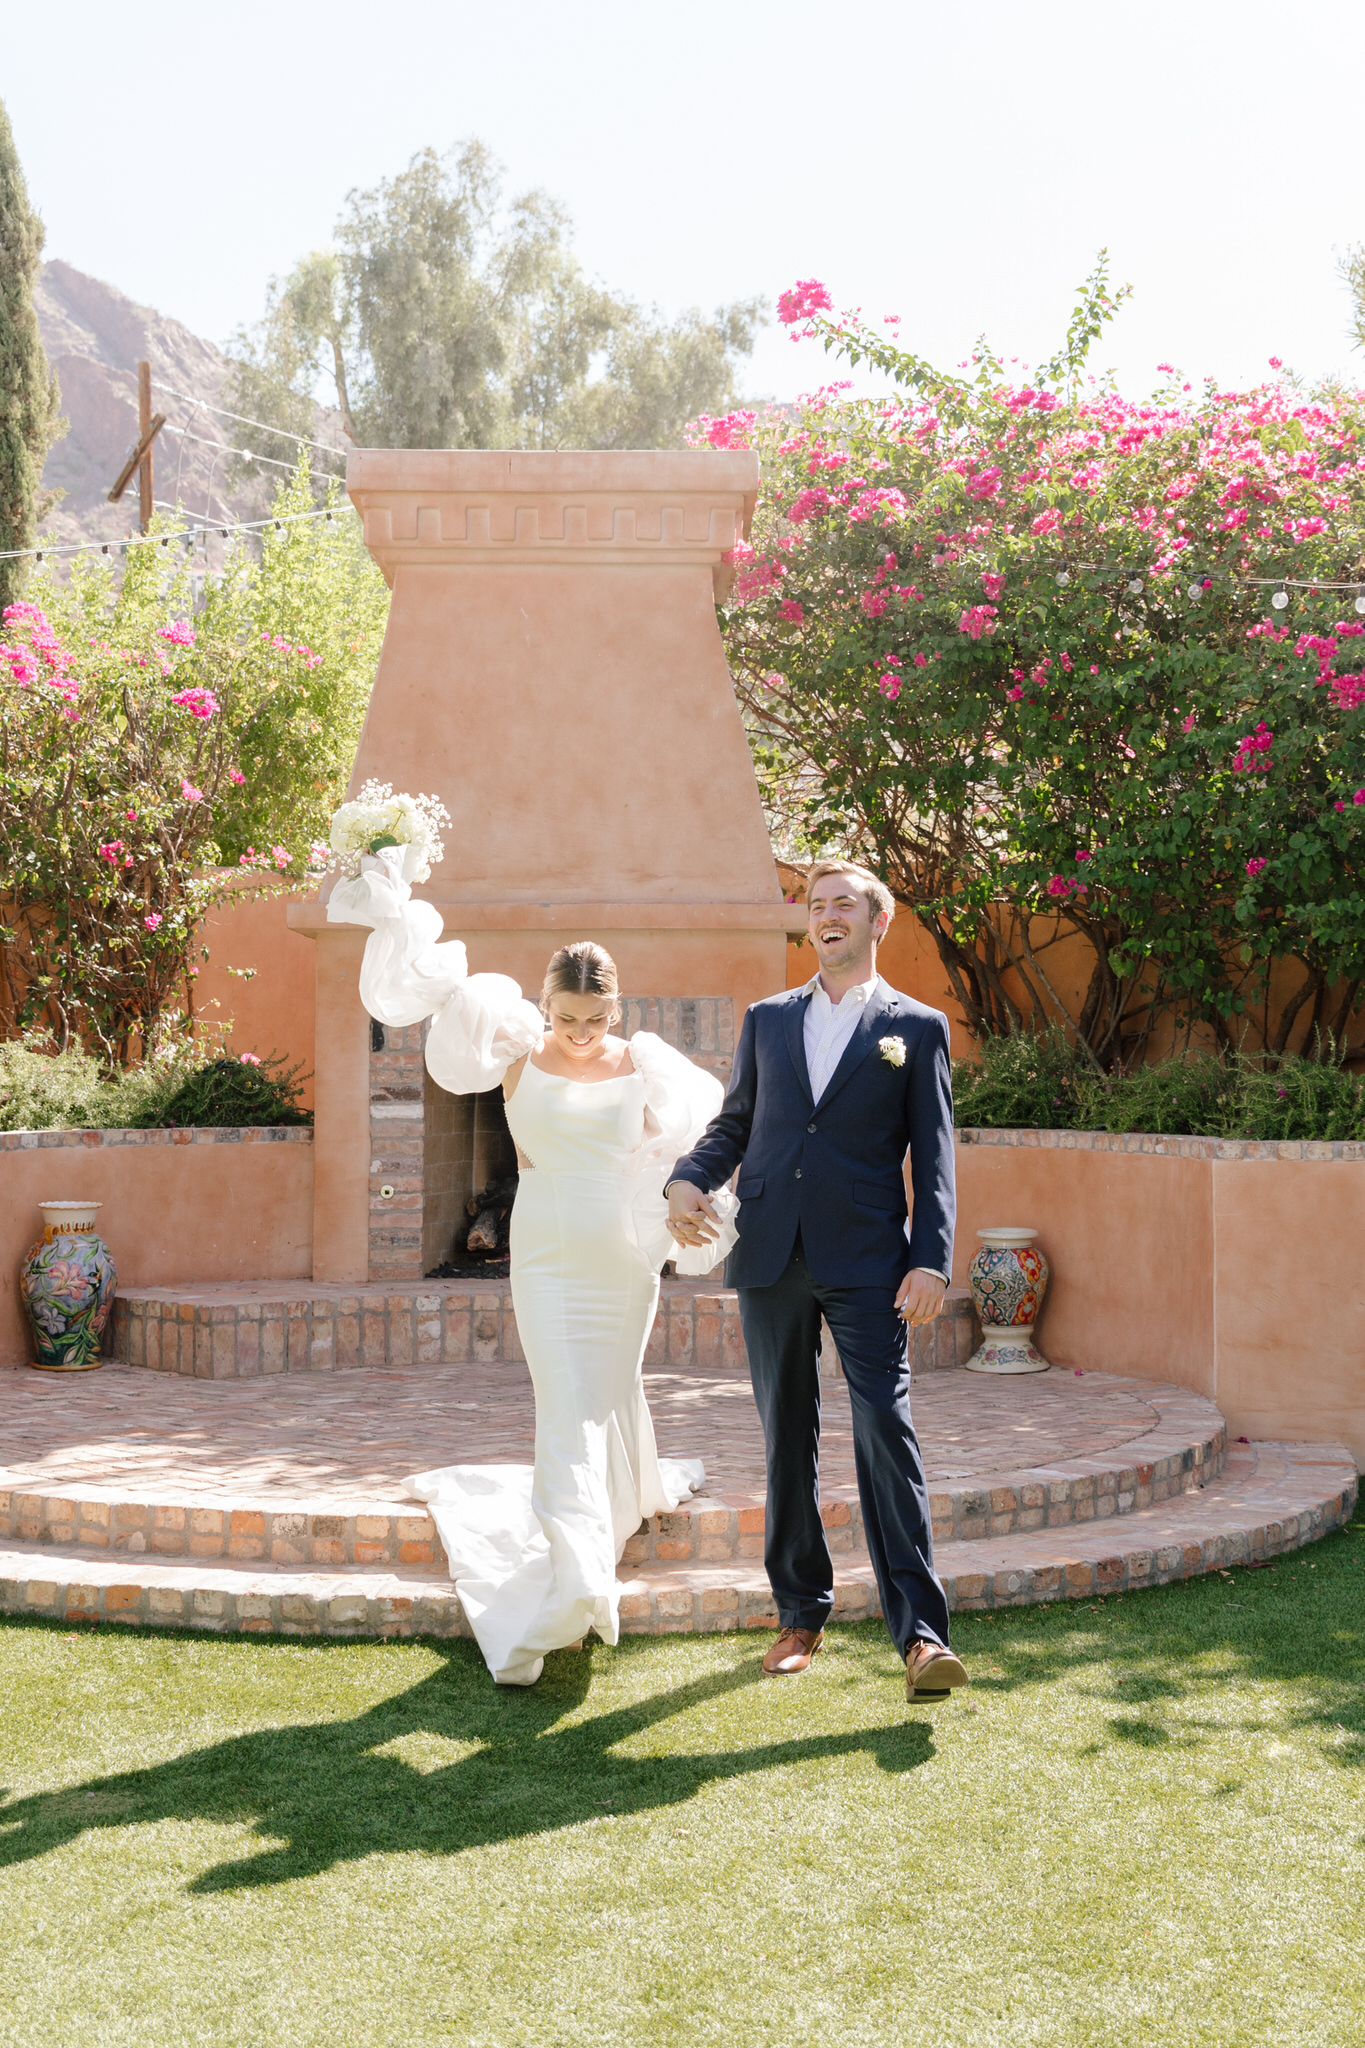 Bride and groom exiting wedding ceremony at one of the best Phoenix wedding venues, the Royal Palms Resort Scottsdale.